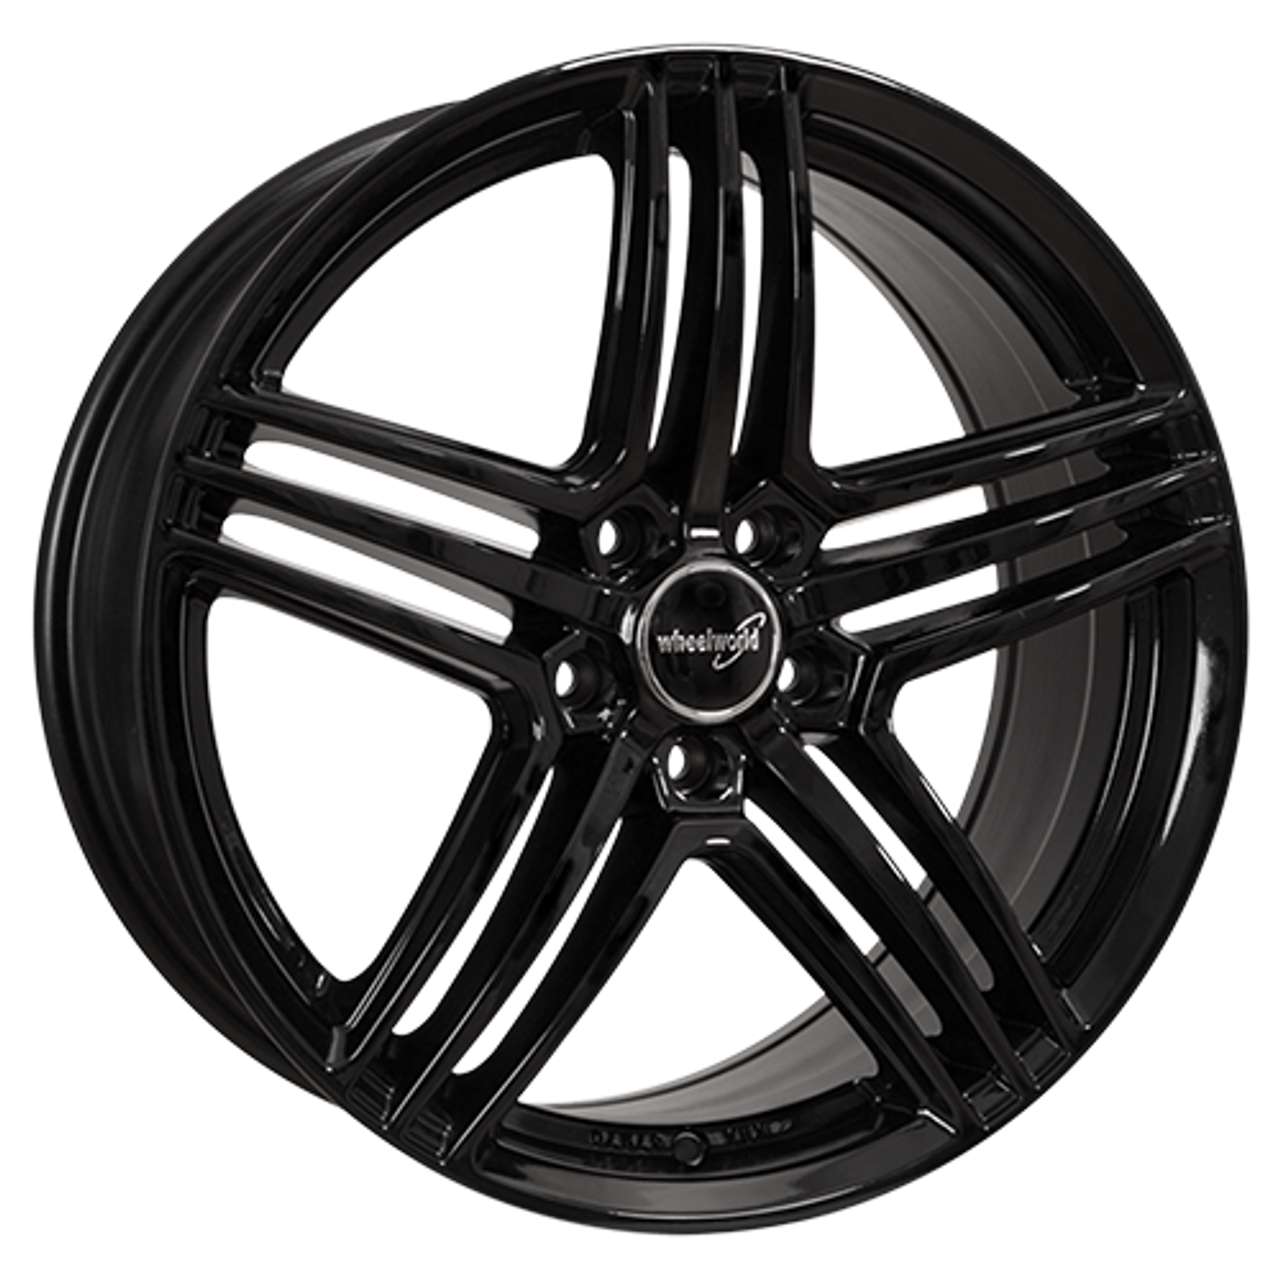 WHEELWORLD-2DRV WH12 black glossy painted 9.0Jx20 5x114.3 ET48